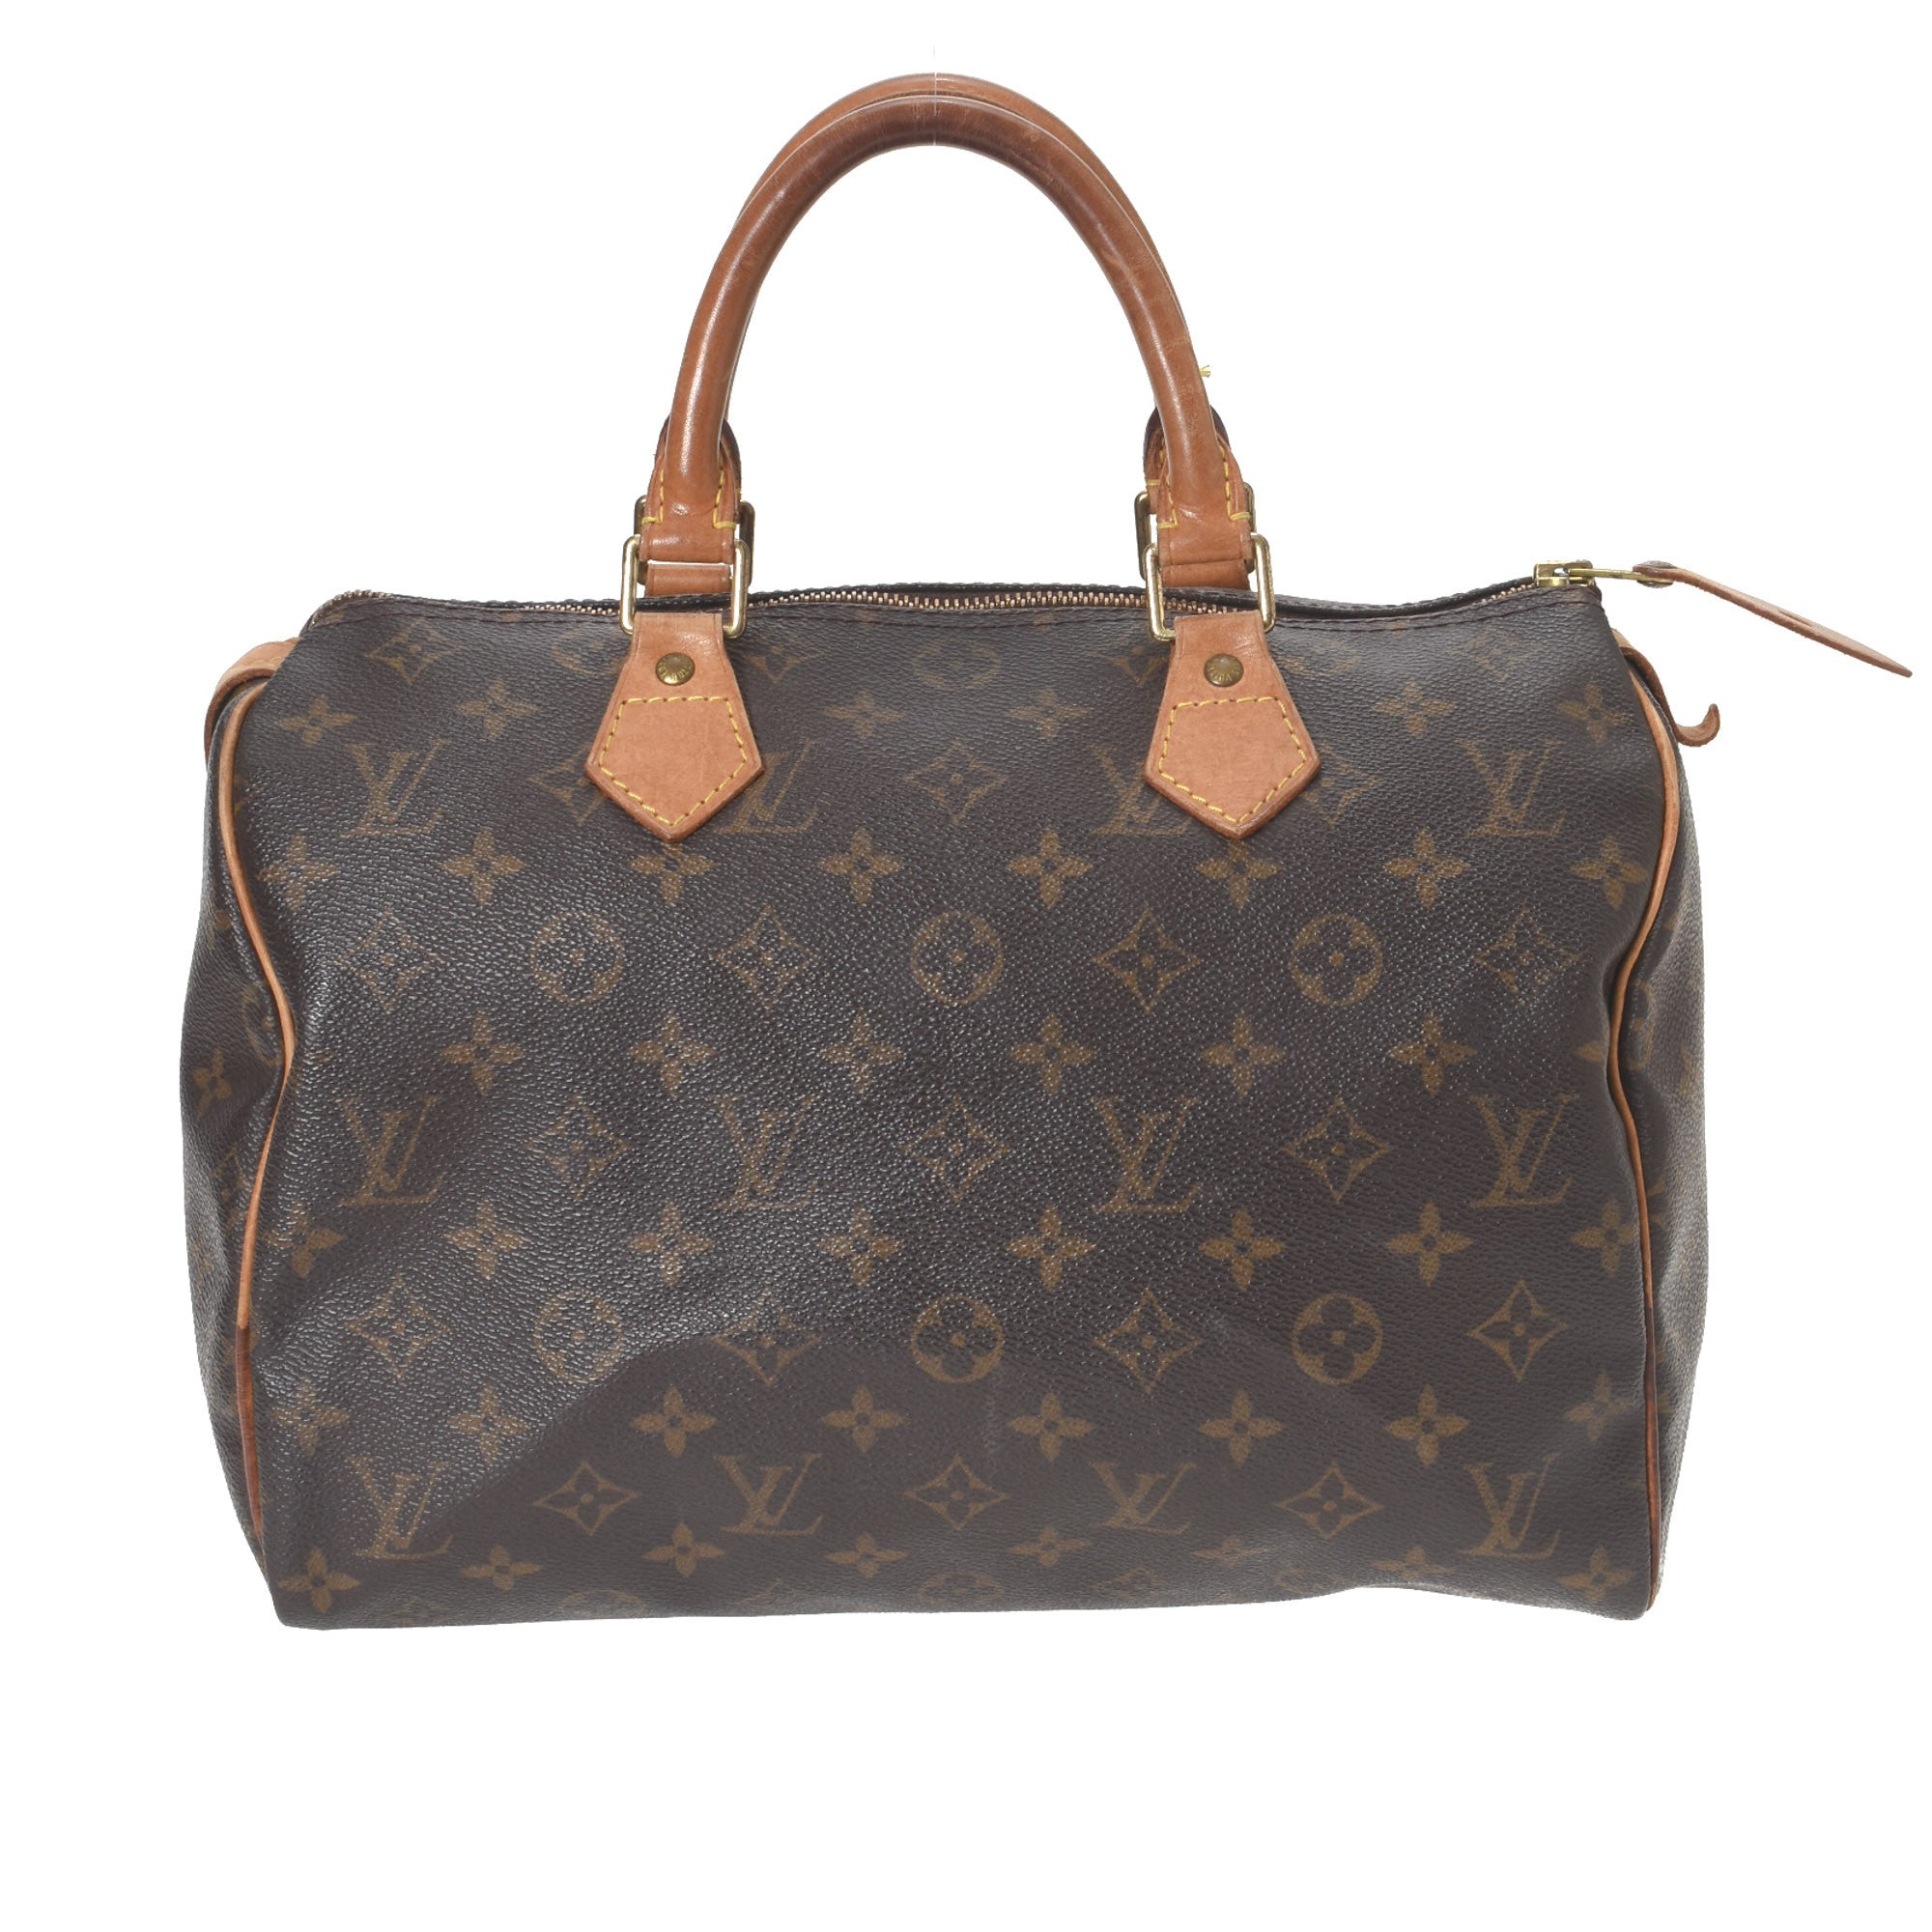 Sold at Auction: Louis Vuitton, LOUIS VUITTON AUTHENTIC PRE-OWNED CARRY-ON  LUGGAGE